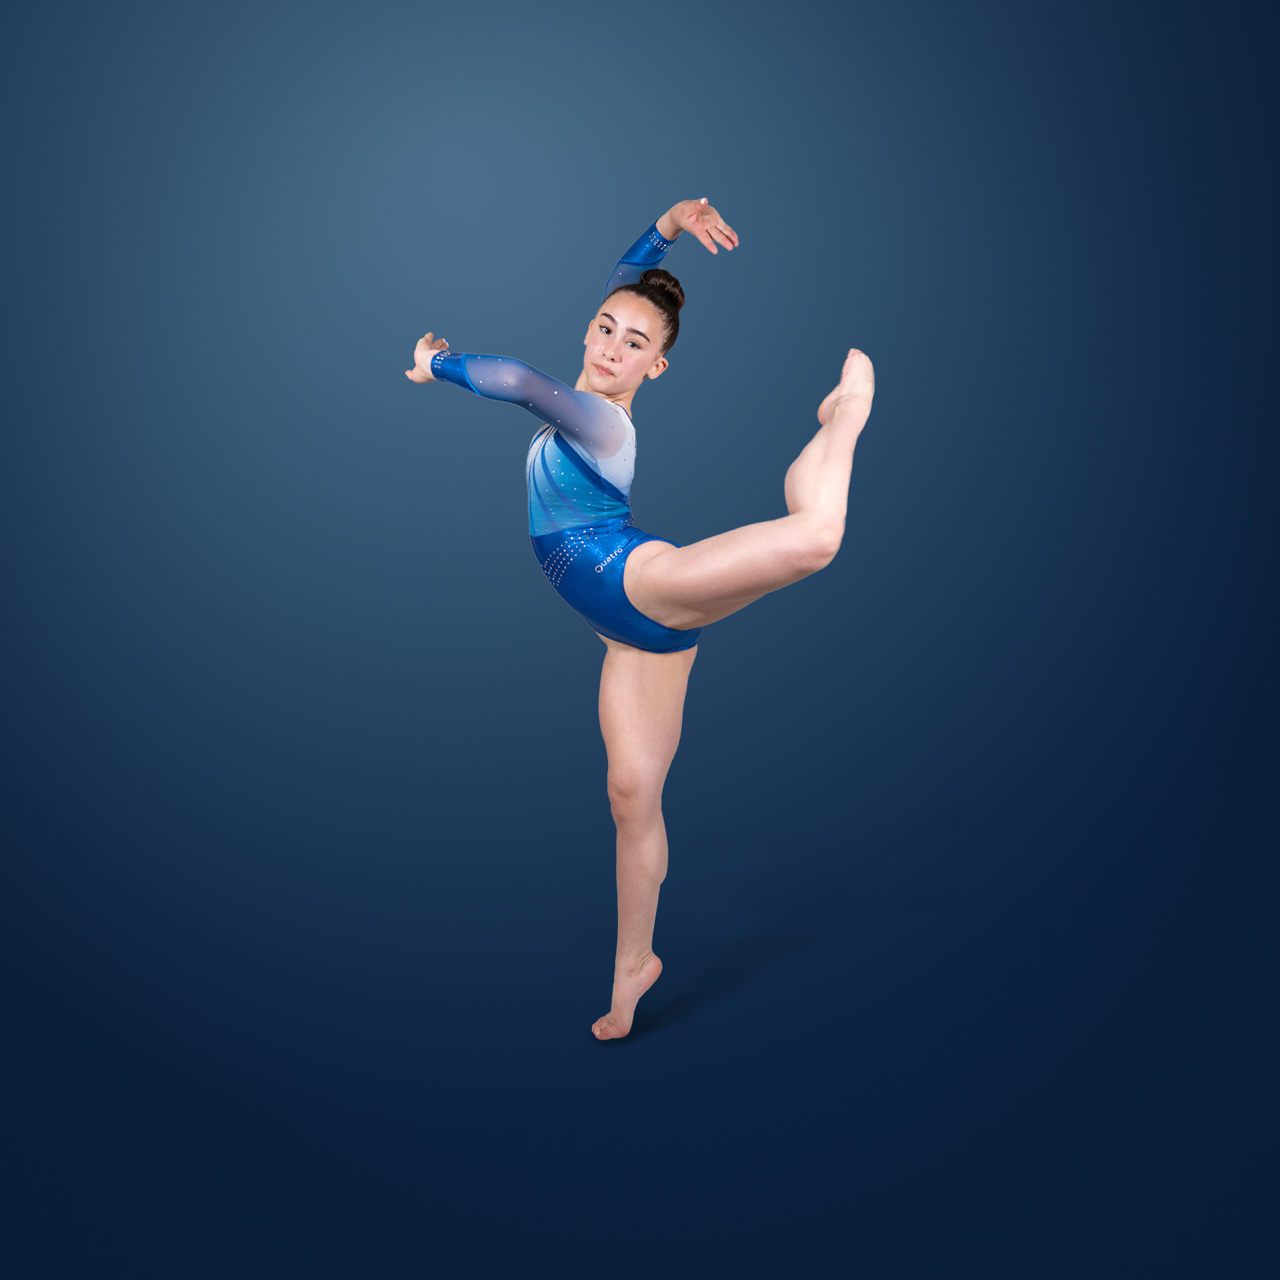 5,116 Aerobic Gymnastics Photos, Pictures And Background Images For Free  Download - Pngtree